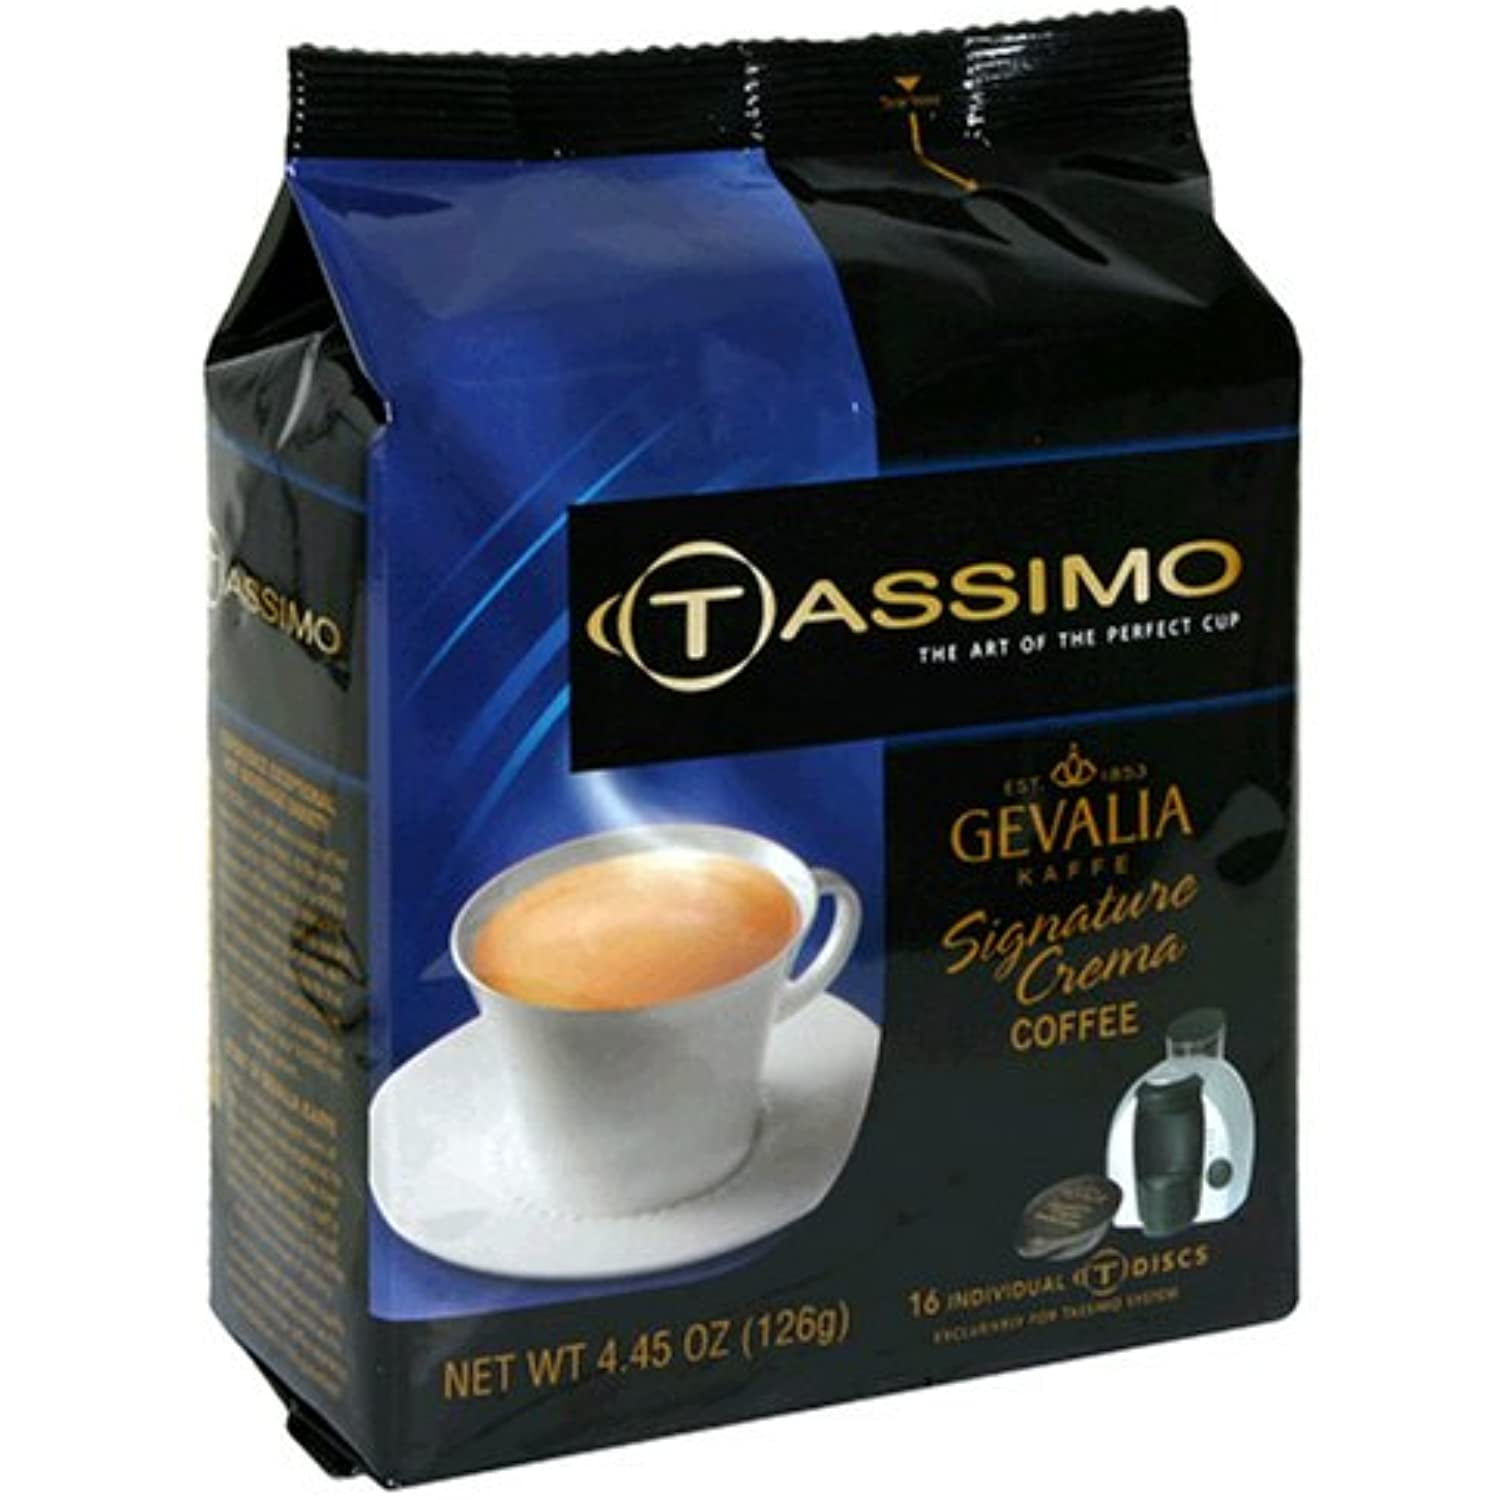 Tassimo Costa Cappuccino T Discs Pods Choose From 8, 16, 32, 48